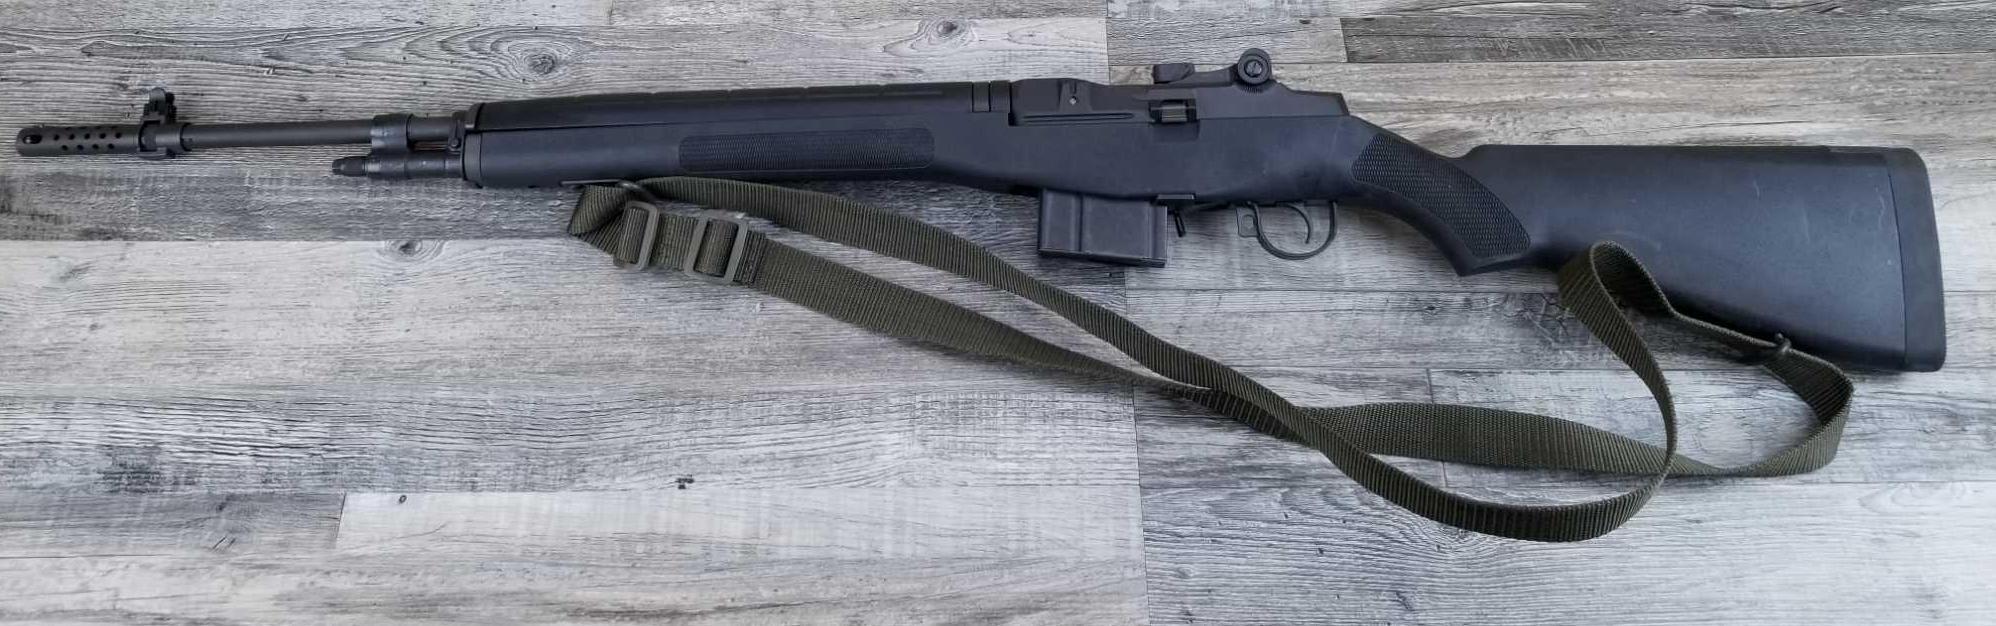 SPRINGFIELD ARMORY MODEL M1A